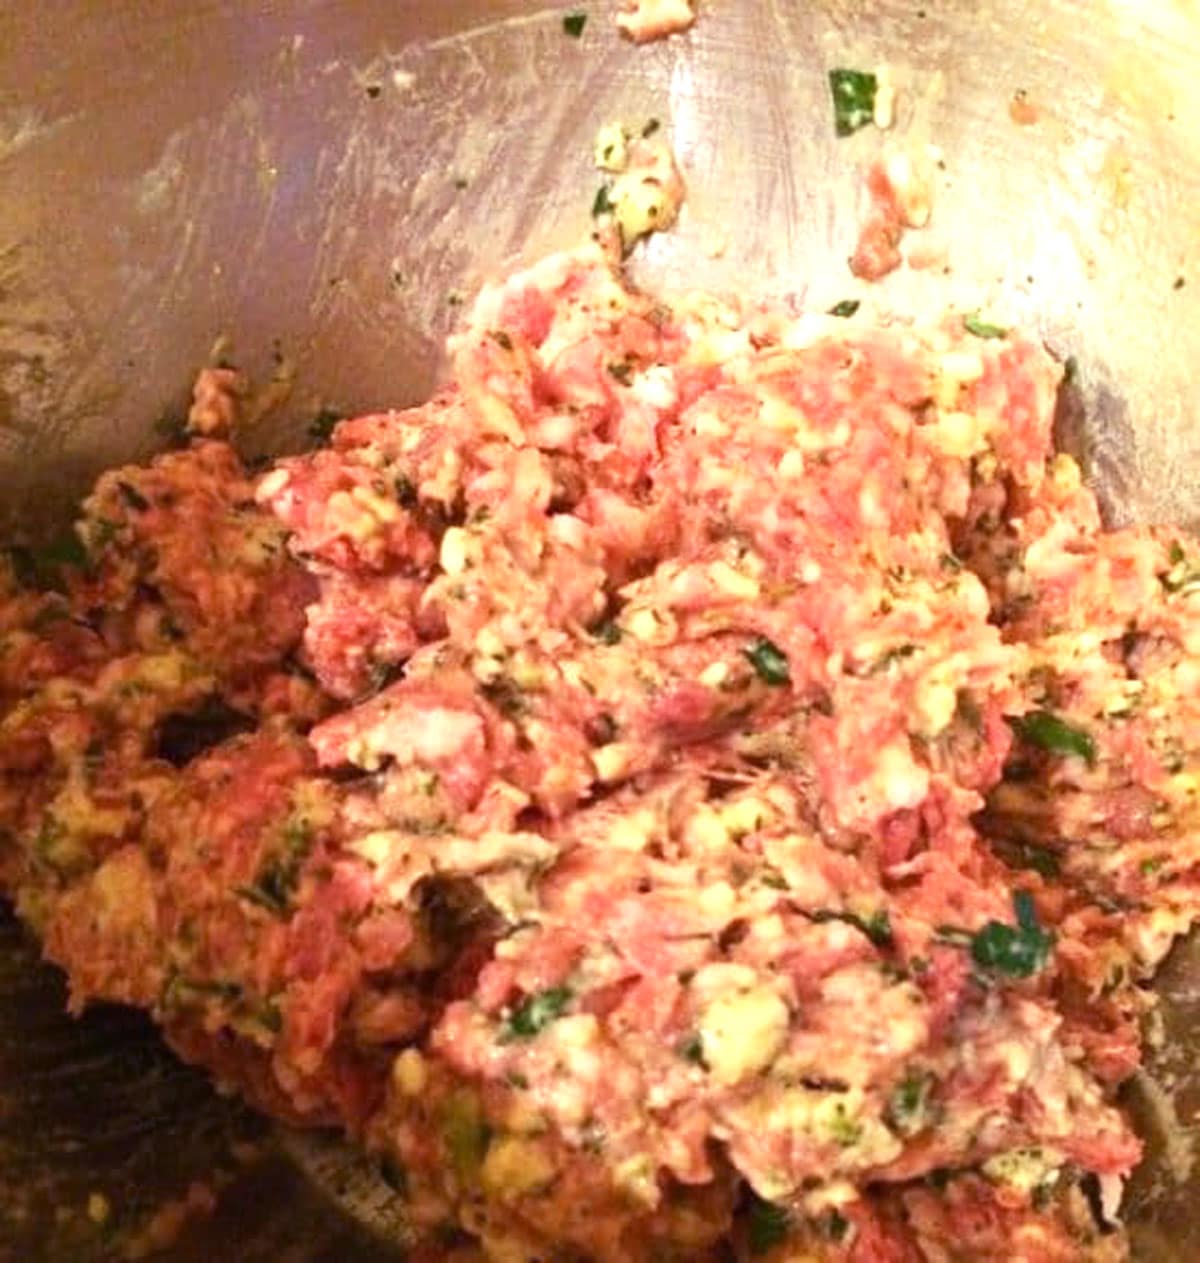 mixed meat mixture in a bowl